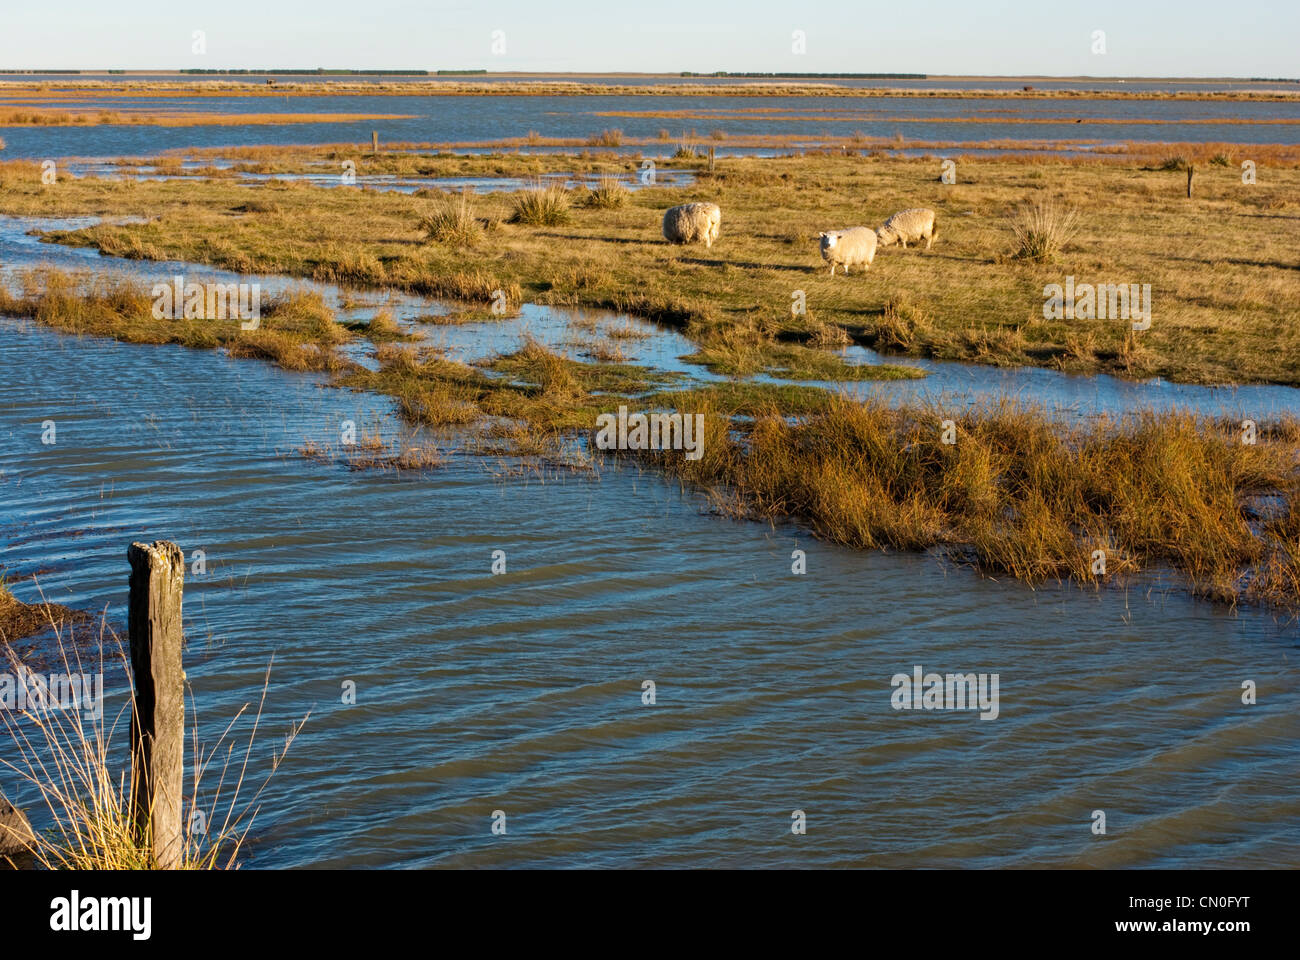 Sheep surrounded by floodwaters, Lake Ellesmere, Canterbury, New Zealand. Stock Photo